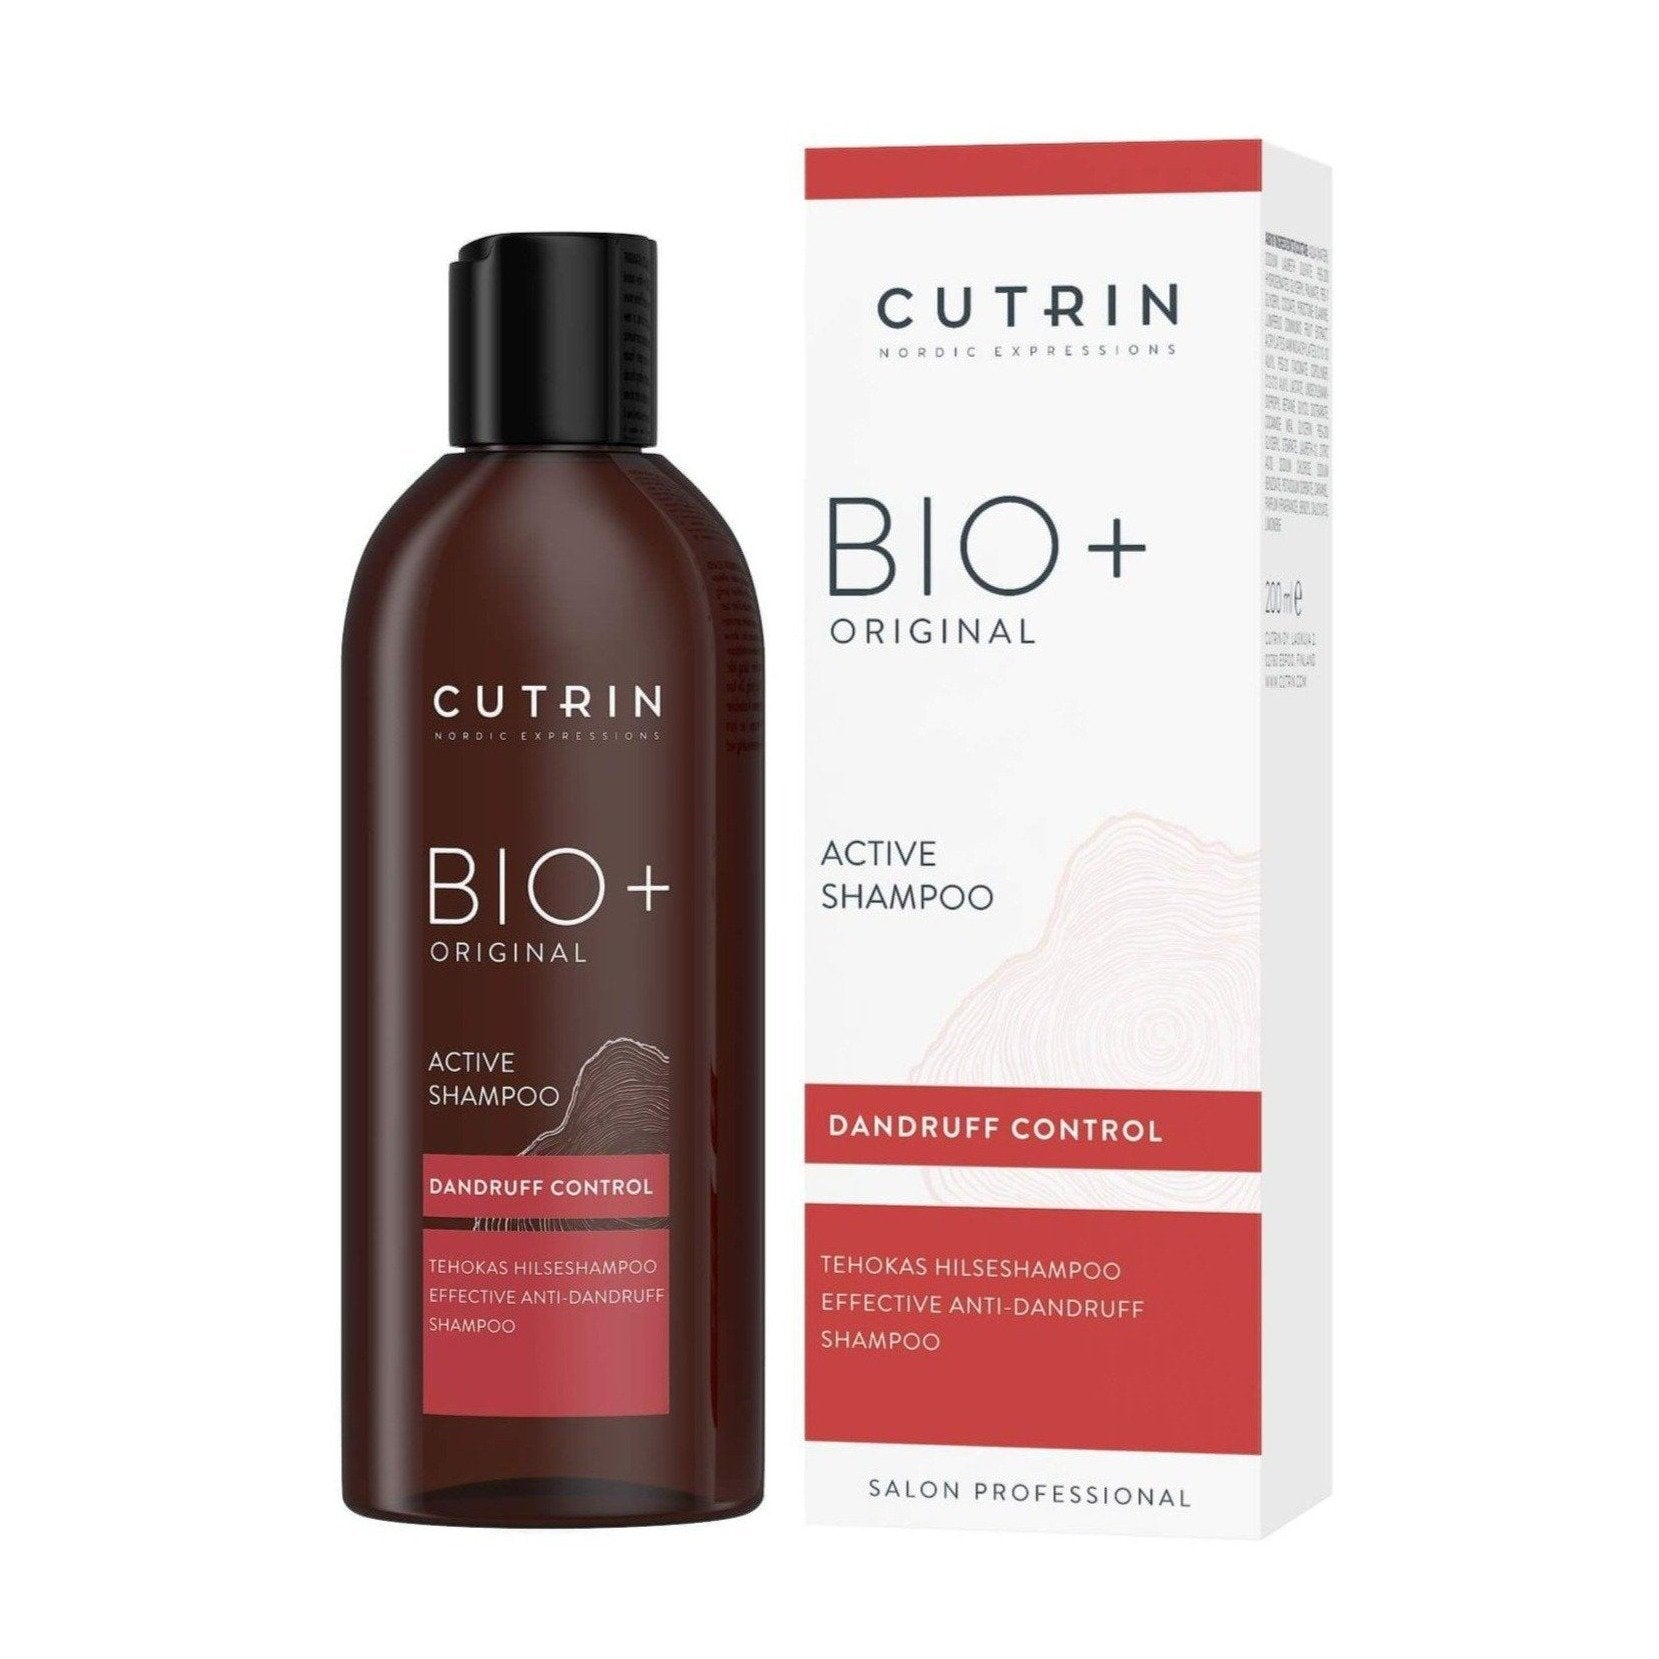 Powered by Nordic nature - CUTRIN